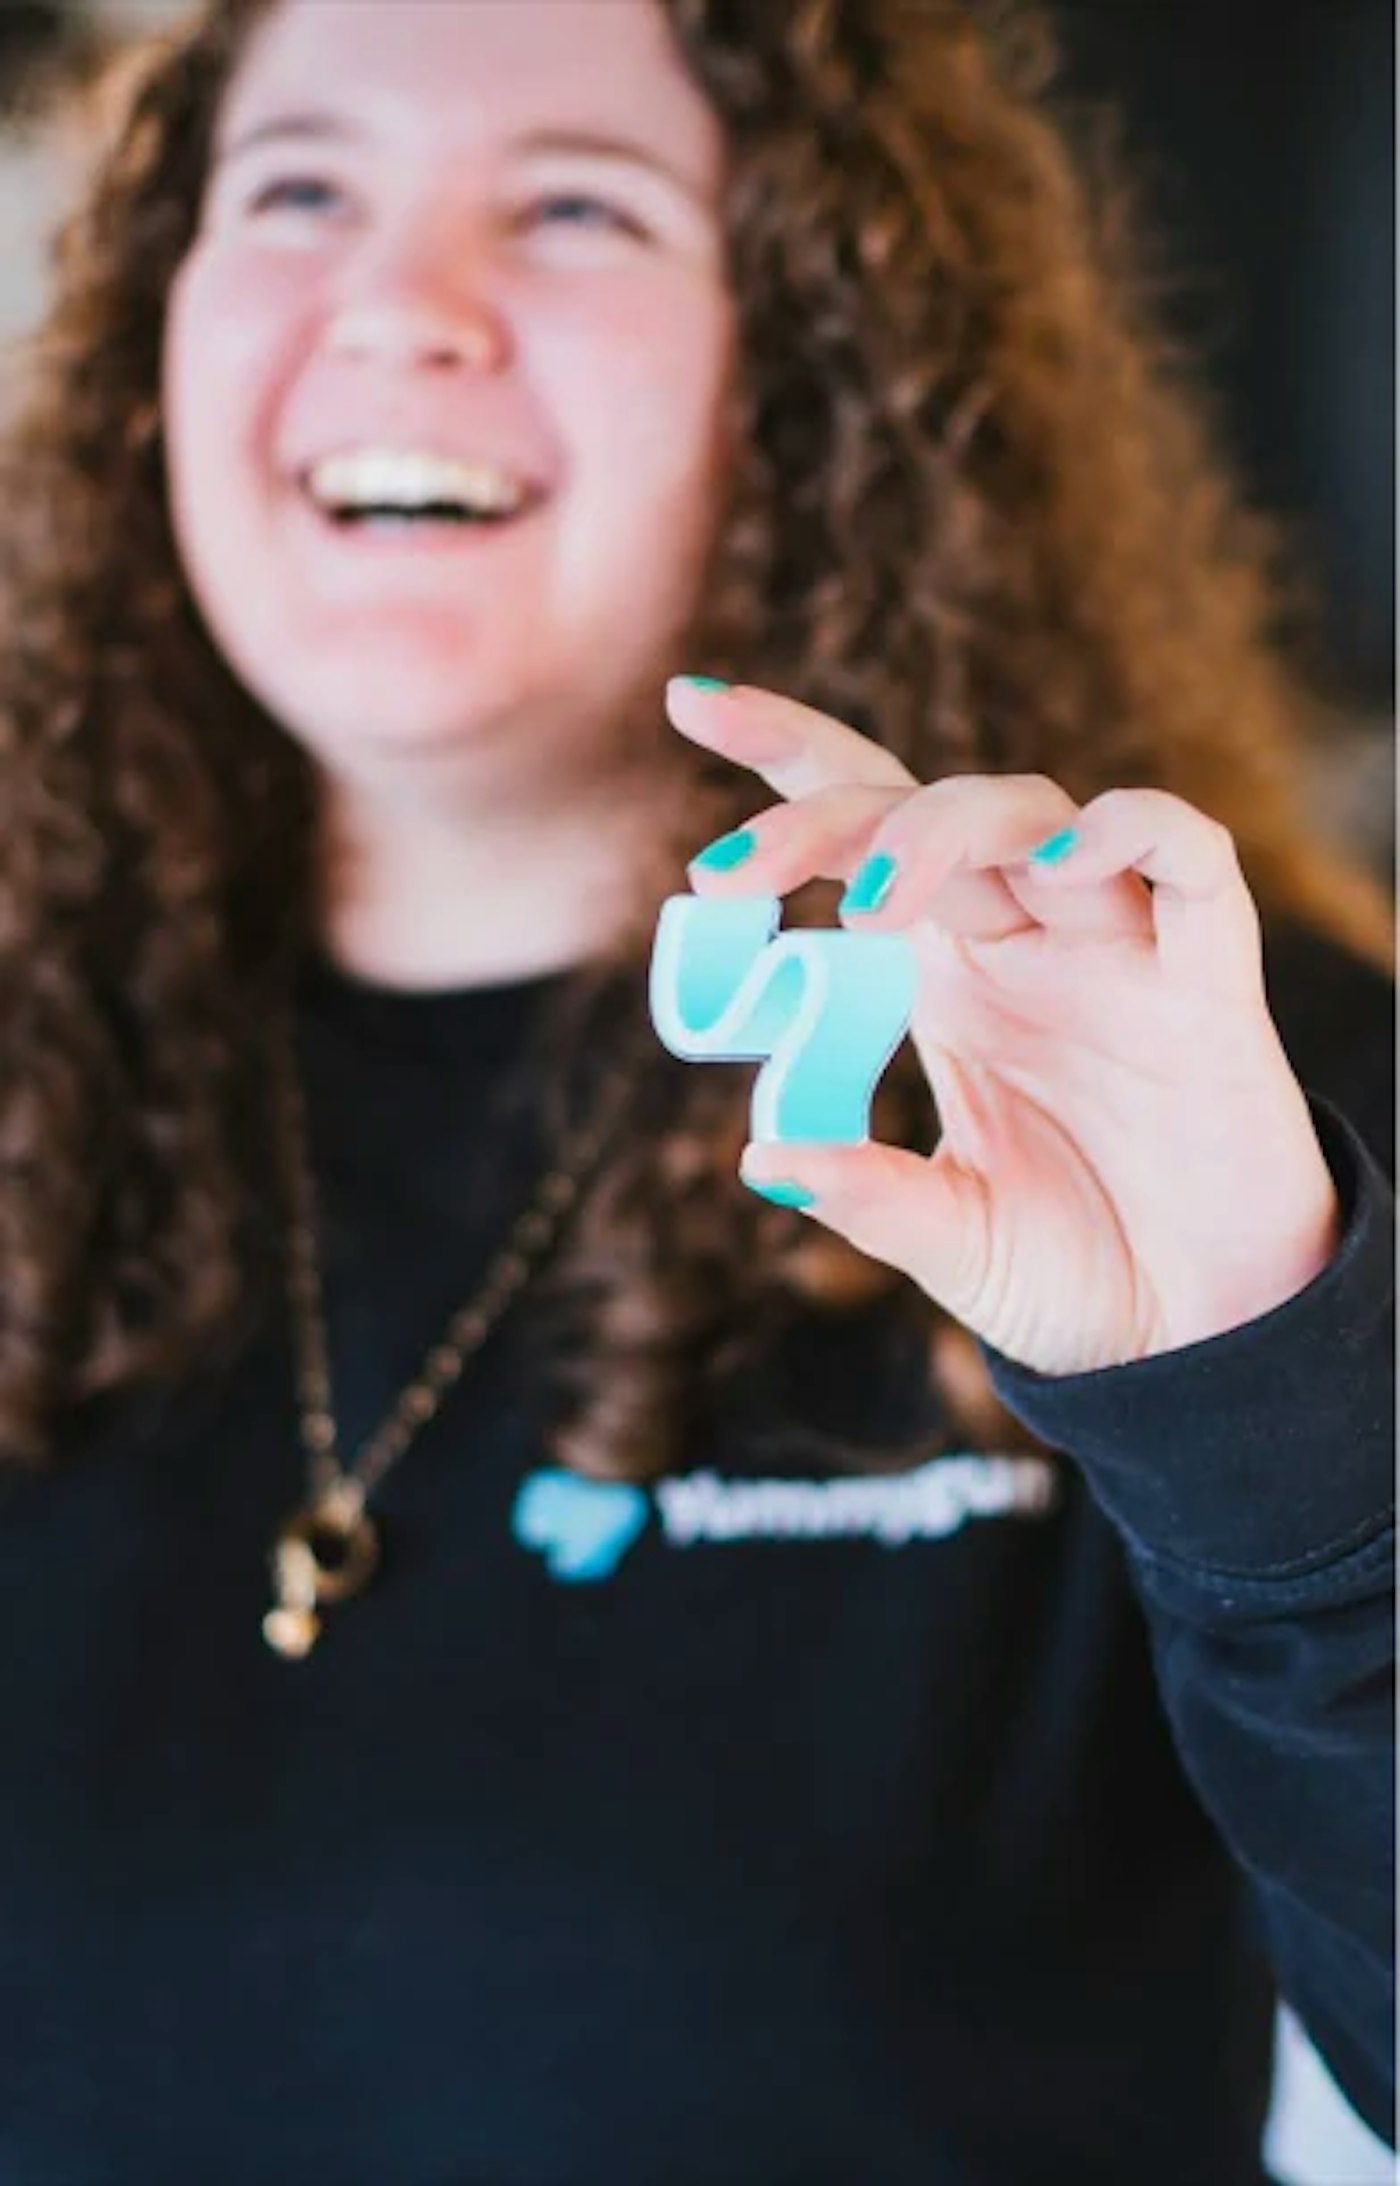 Smiling person holding up an enamel pin of a turquoise Yummygum logo mark.